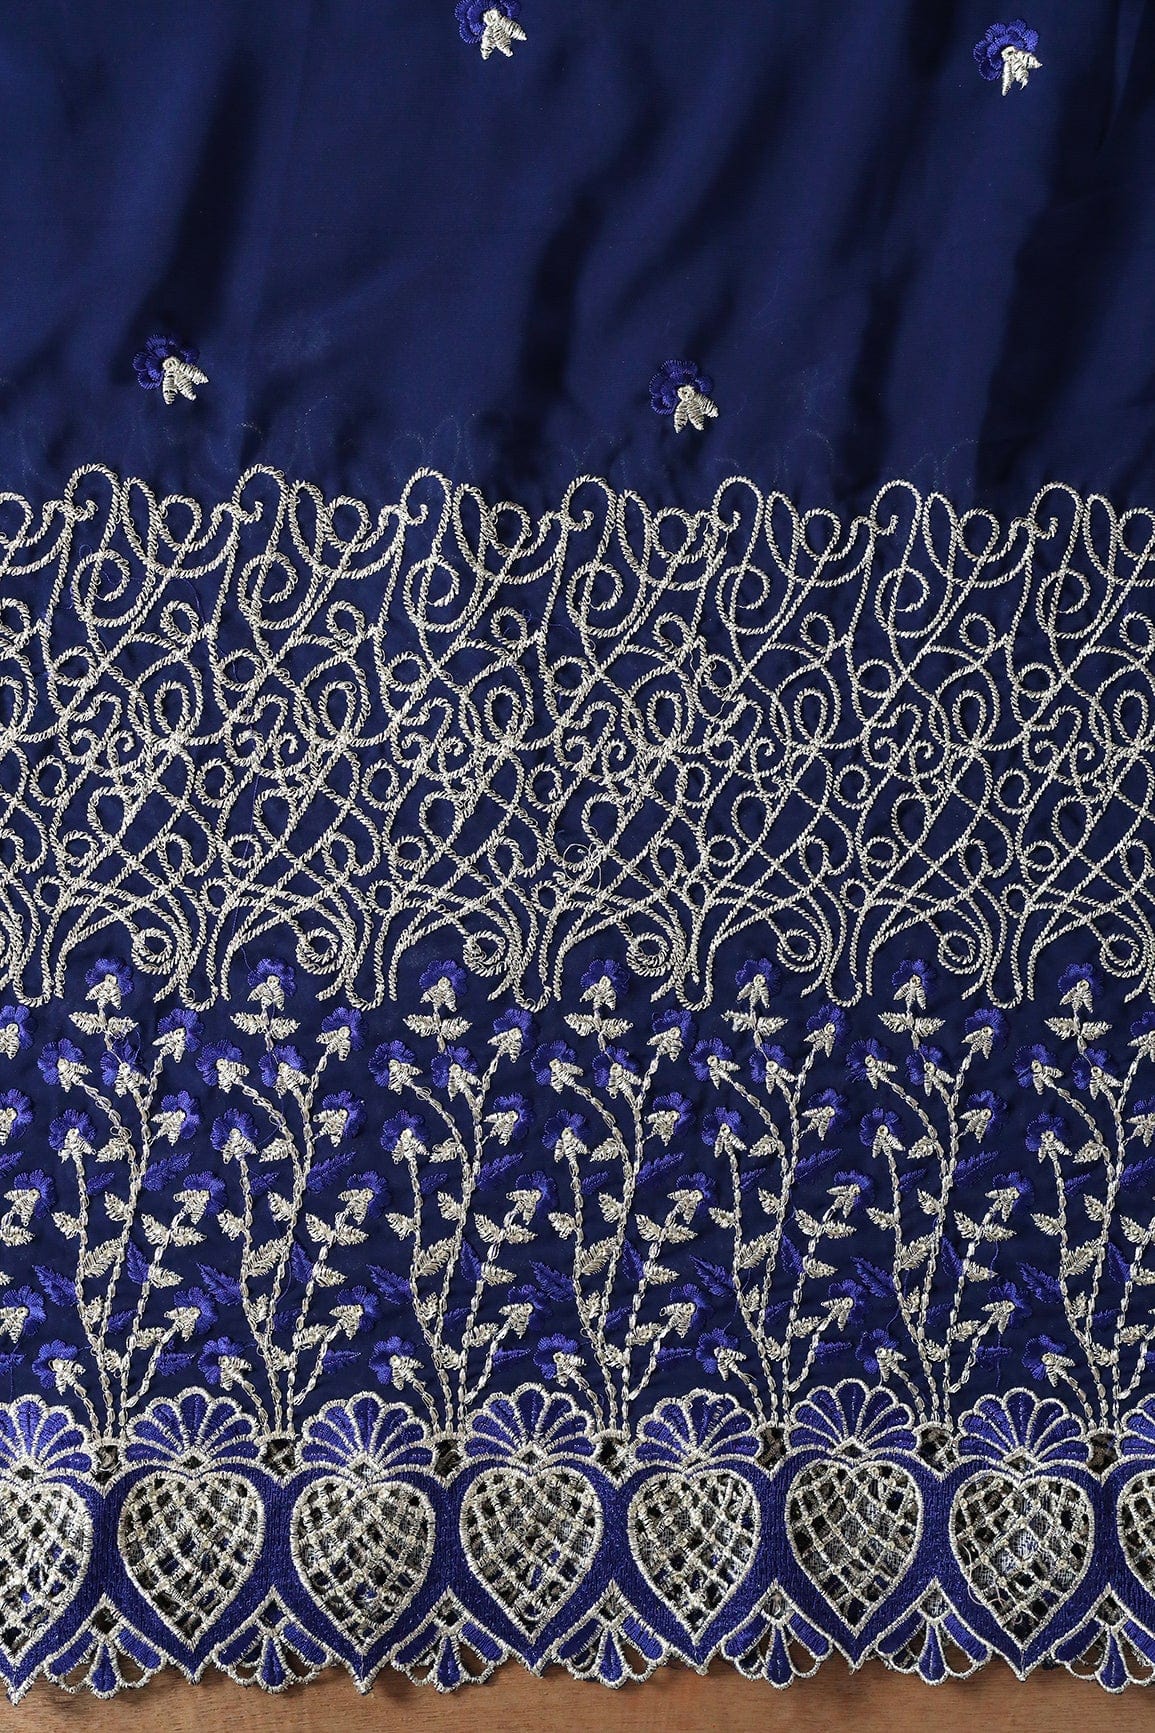 Big Width''56'' Blue Thread With Zari Floral Embroidery Work On Navy Blue Georgette Fabric With Border - doeraa